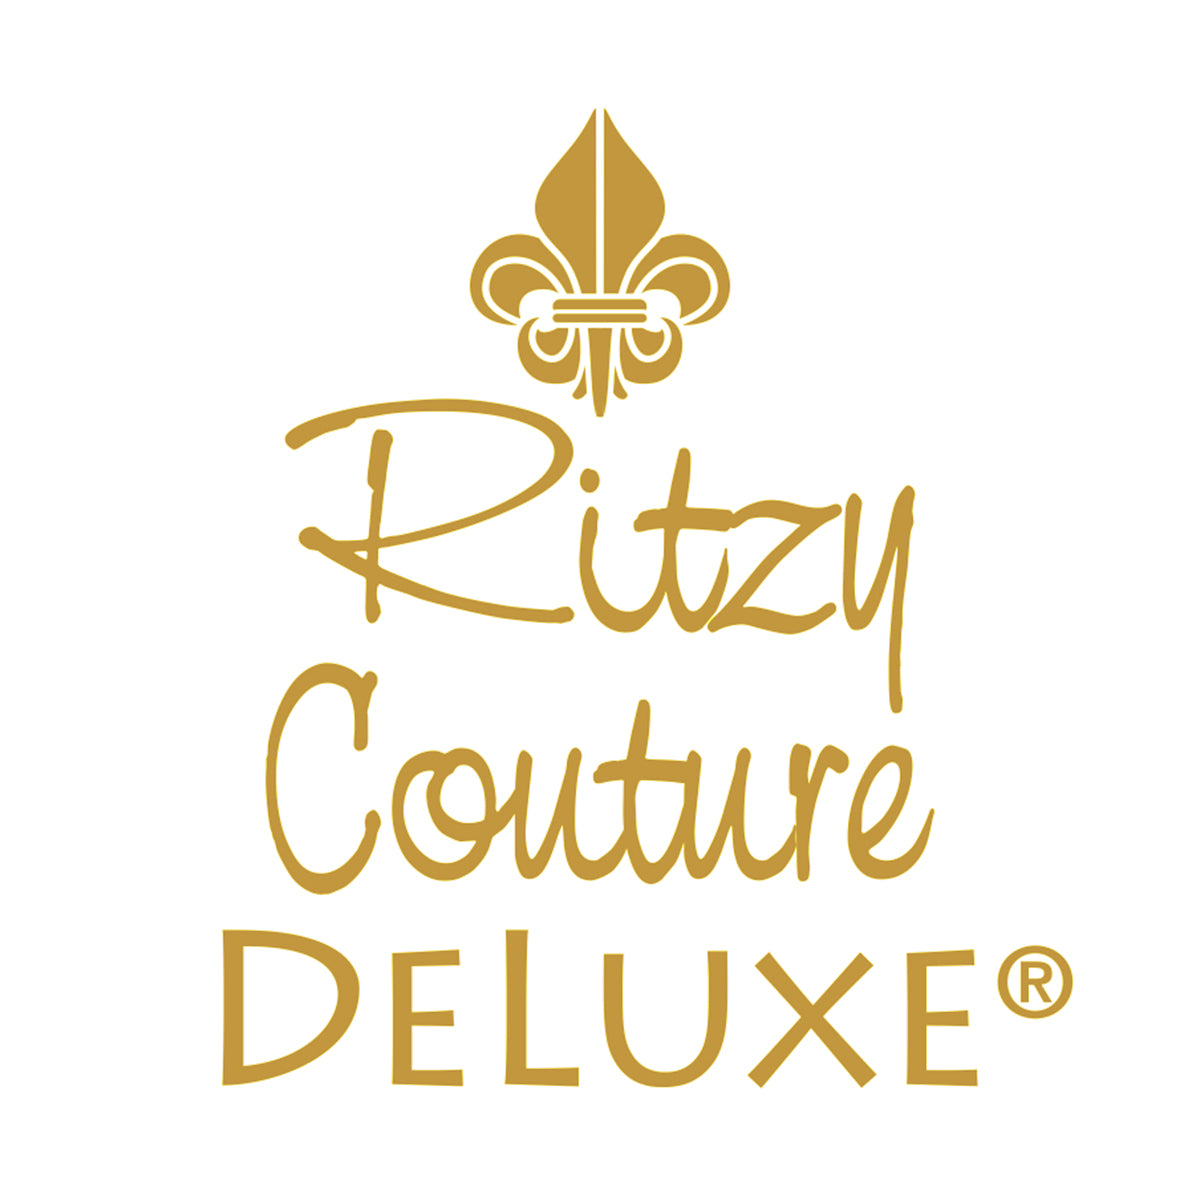 Ritzy Couture DeLuxe Luxury Necklace Chains For Charms - Fine Silver Plating